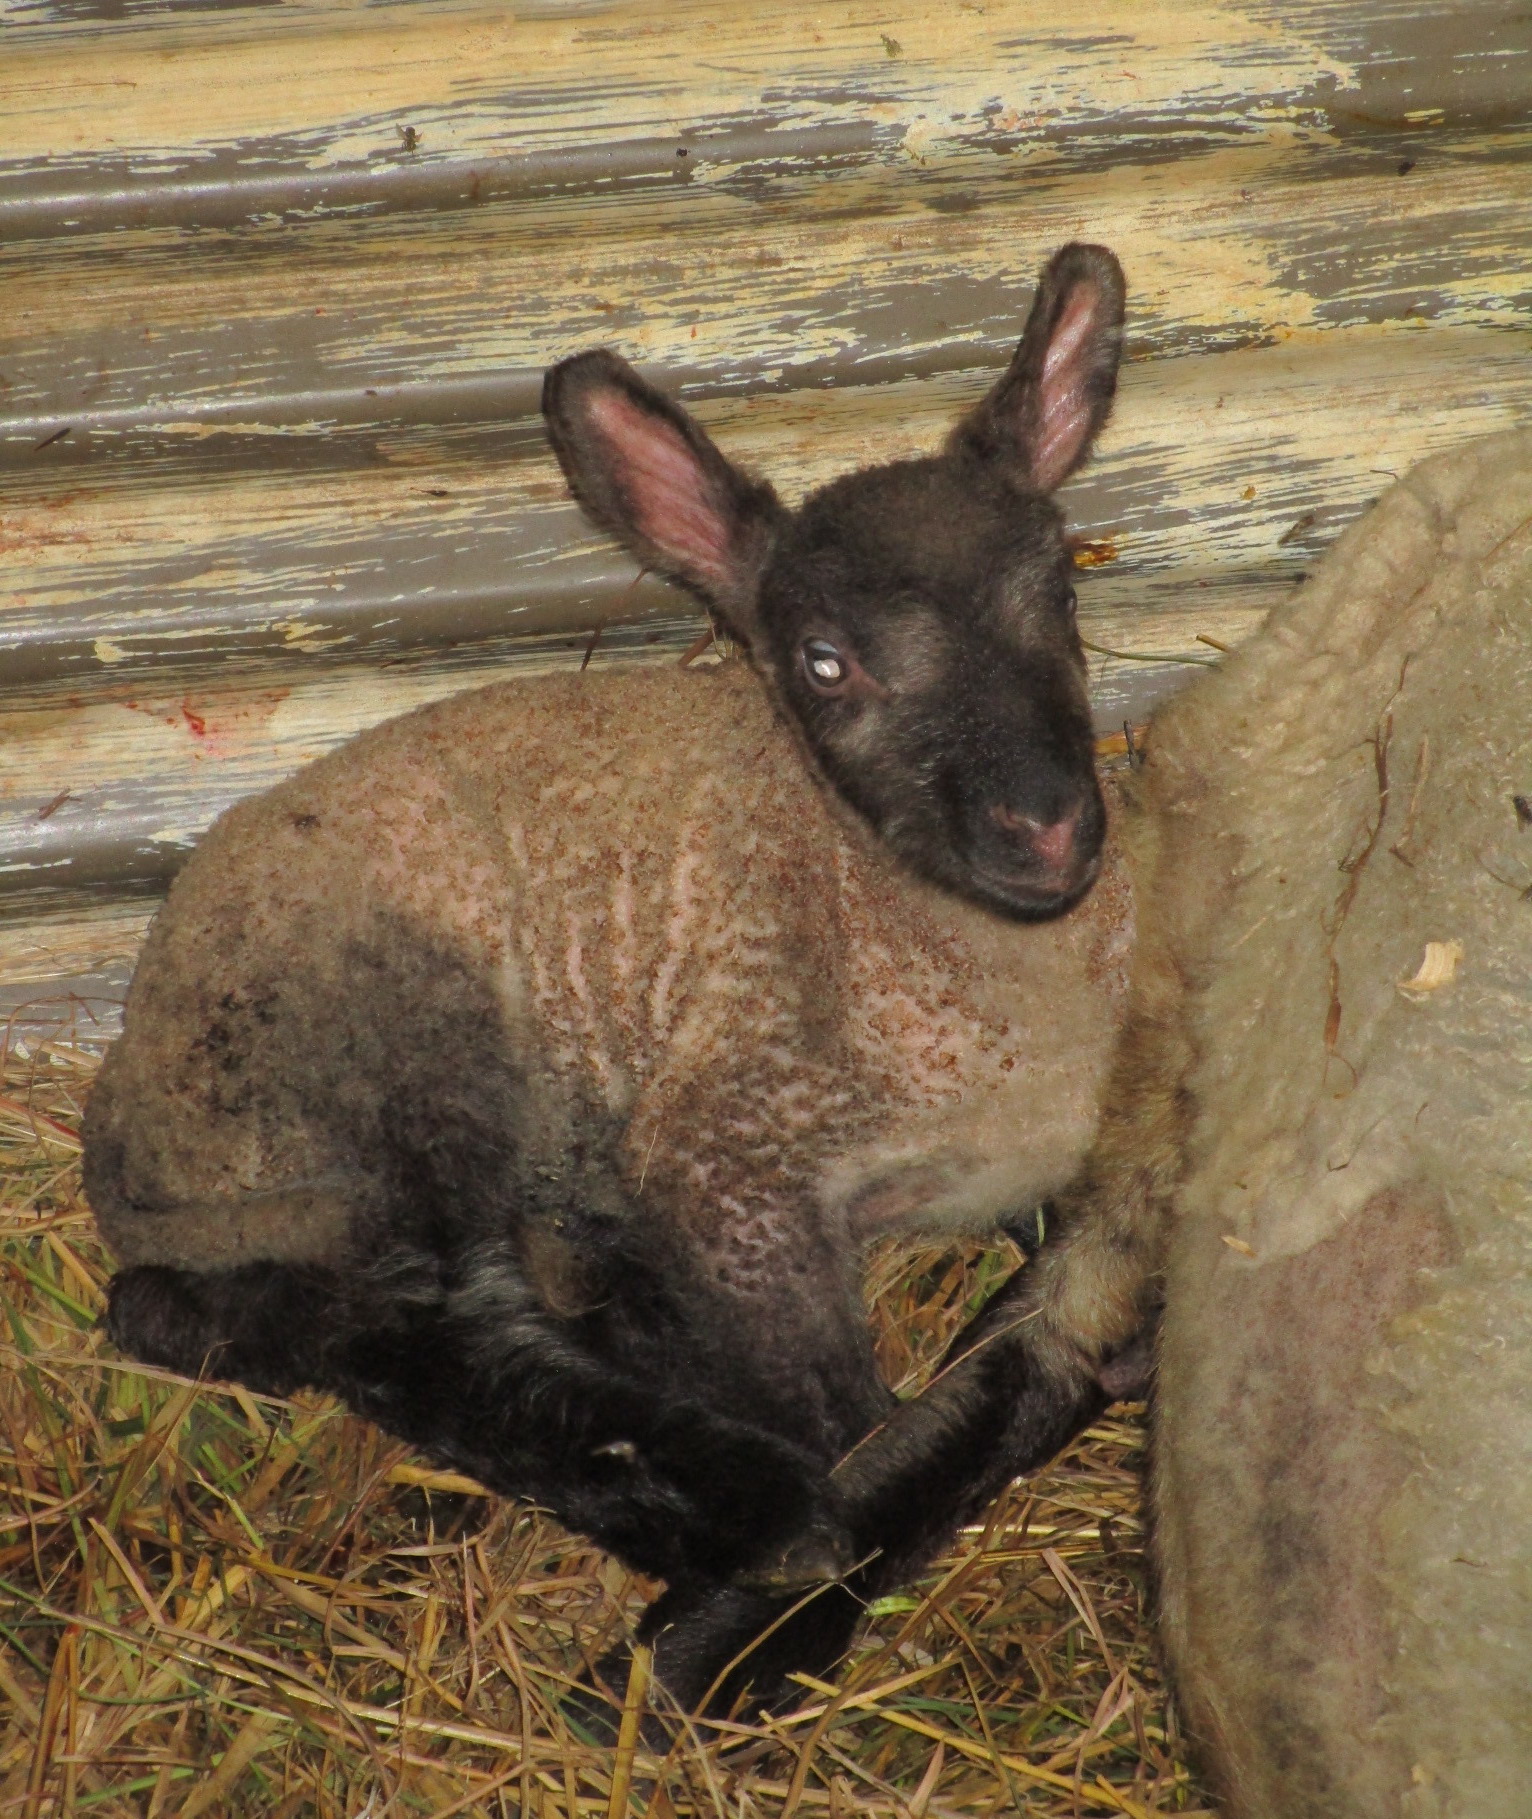 The ewe lamb at 12 hrs old